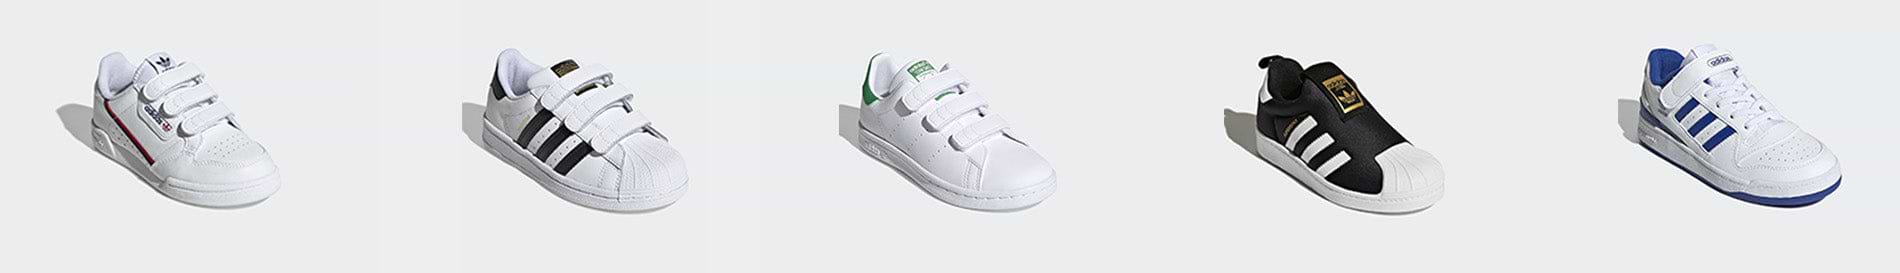 SHOES - KIDS & BABY - 99 NIS